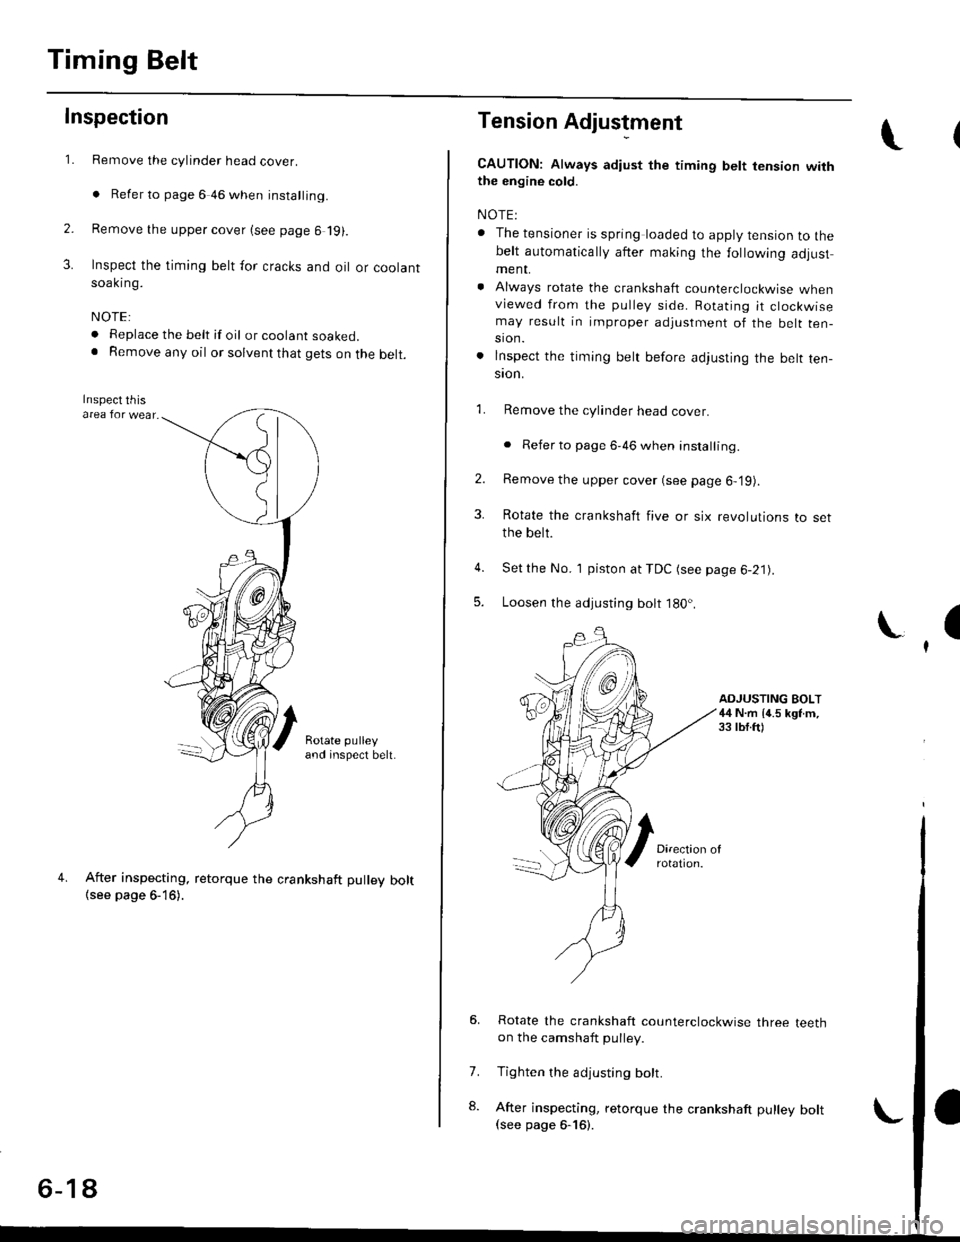 HONDA CIVIC 1997 6.G Manual PDF Timing Belt
Inspection
1.
2.
3.
Remove the cylinder head cover.
. Refer to page 6 46 when installing.
Remove the upper cover (see page 6 19).
Inspect the timing belt for cracks and oil or coolantsoakr